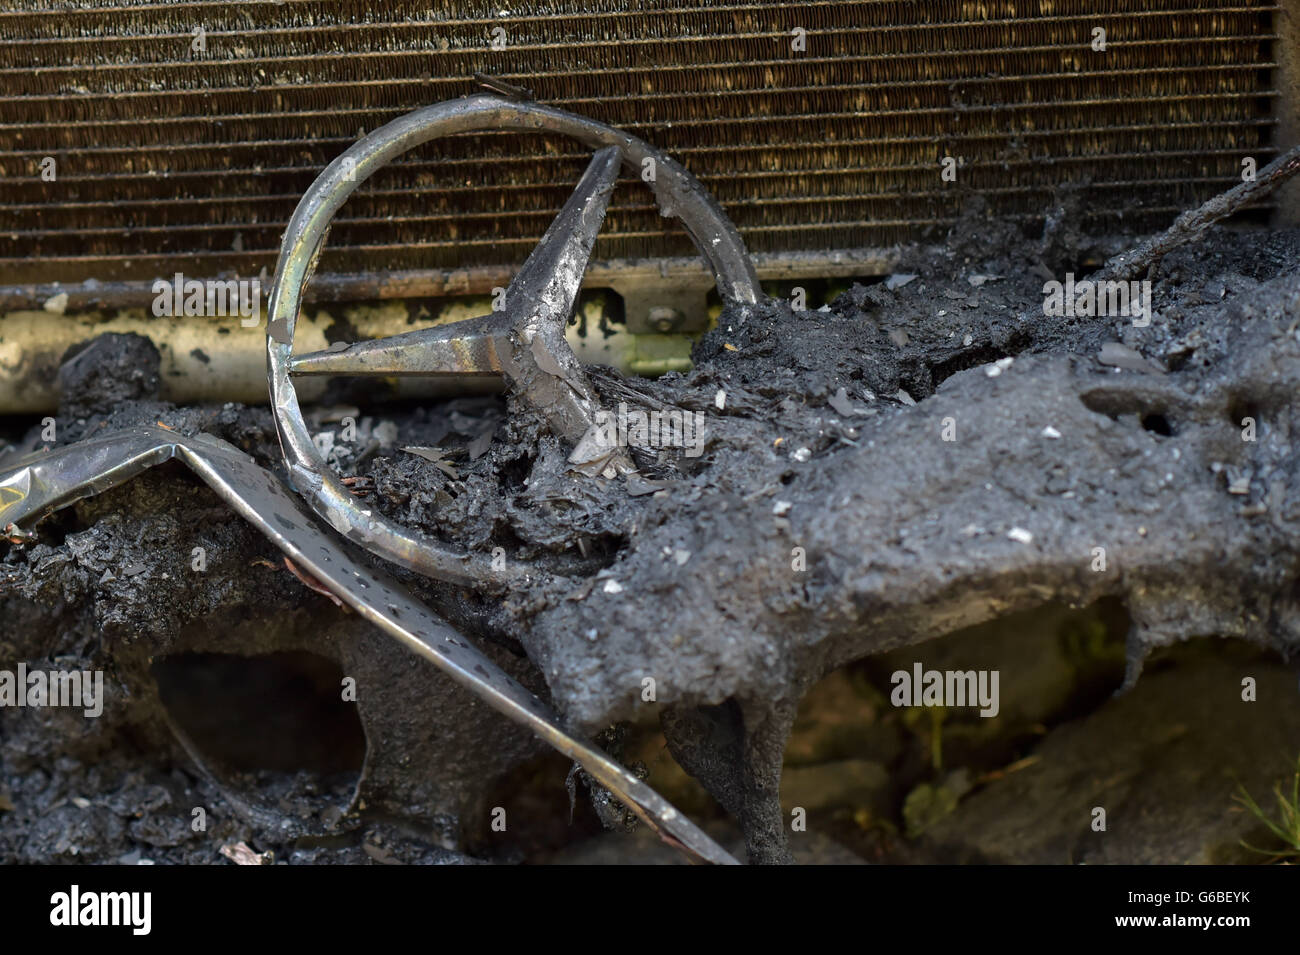 Berlin, Germany. 24th June, 2016. The star of a Mercedes lying in the ashes of a burnt out car in Berlin, Germany, 24 June 2016. After a police operation at Rigaer Strasse on 22 June, cars were lit on fire for the second night in a row. PHOTO: KLAUS-DIETMAR GABBERT/dpa/Alamy Live News Stock Photo